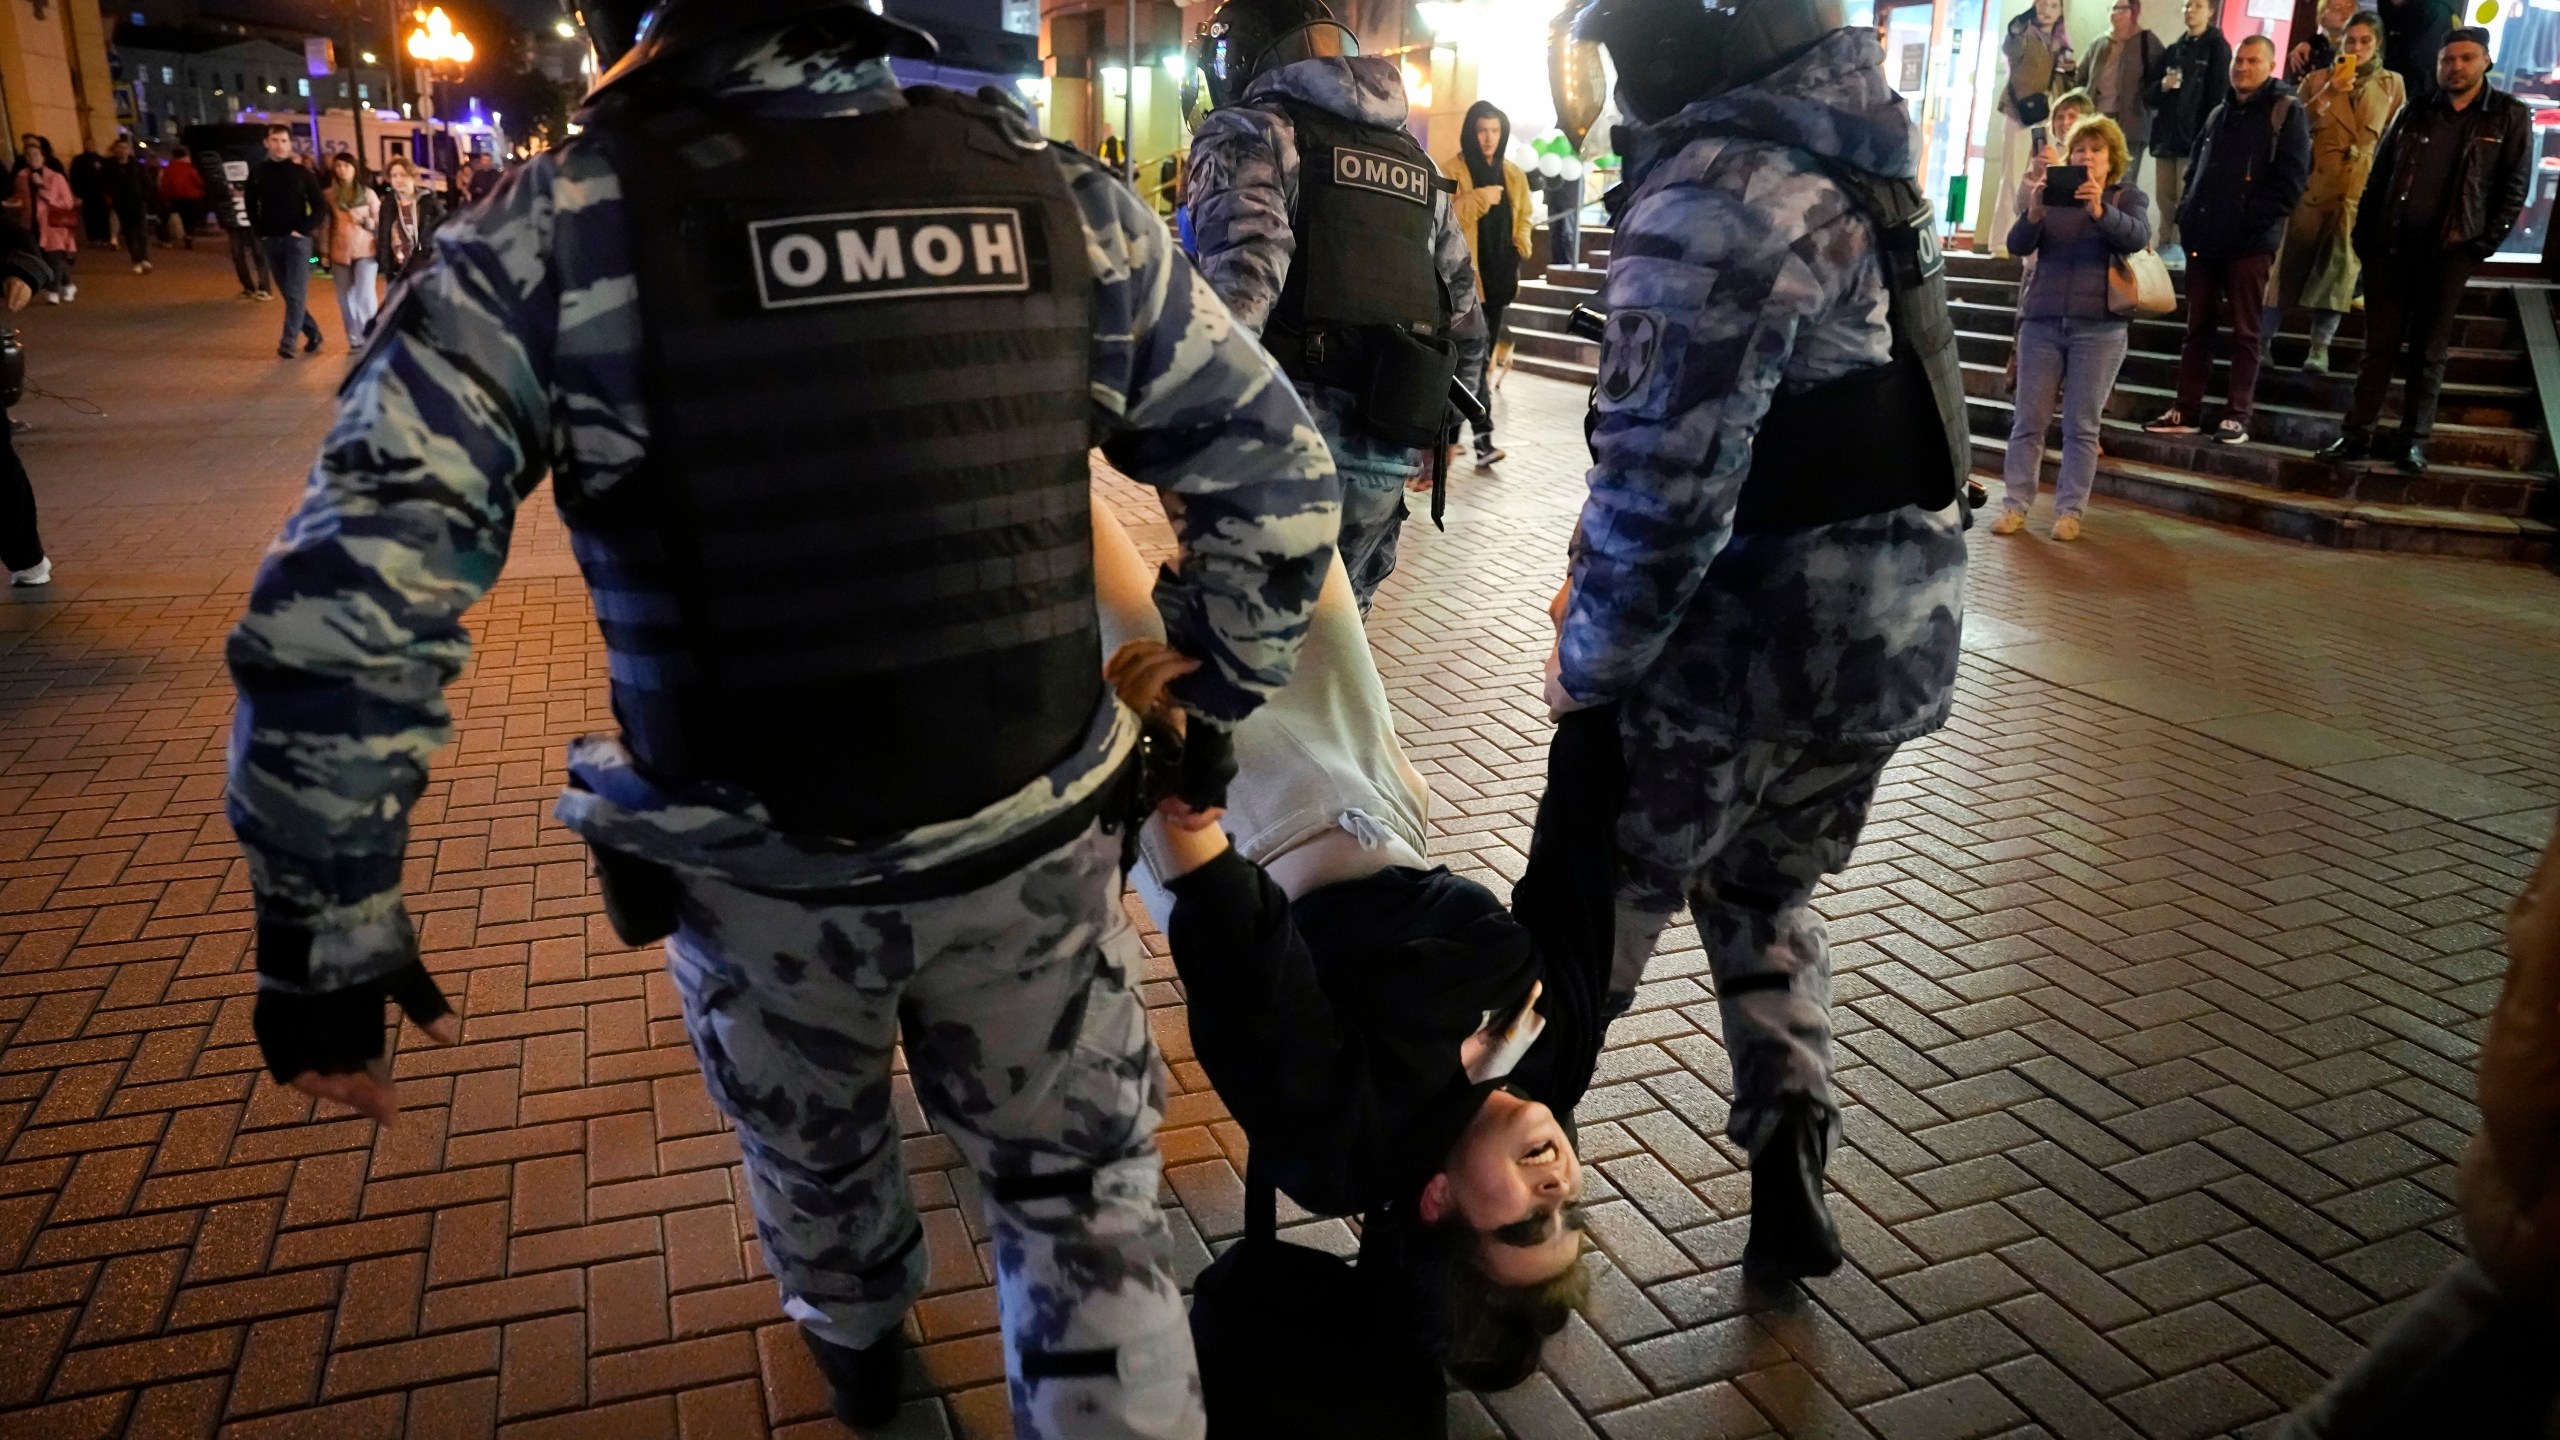 FILE - Riot police detain a demonstrator during a protest against mobilization in Moscow on Wednesday, Sept. 21, 2022. In the last two years, ordinary Russians have been increasingly swept up in an unprecedented government crackdown, together with opposition politicians, independent journalists and human rights activists. (AP Photo, File)